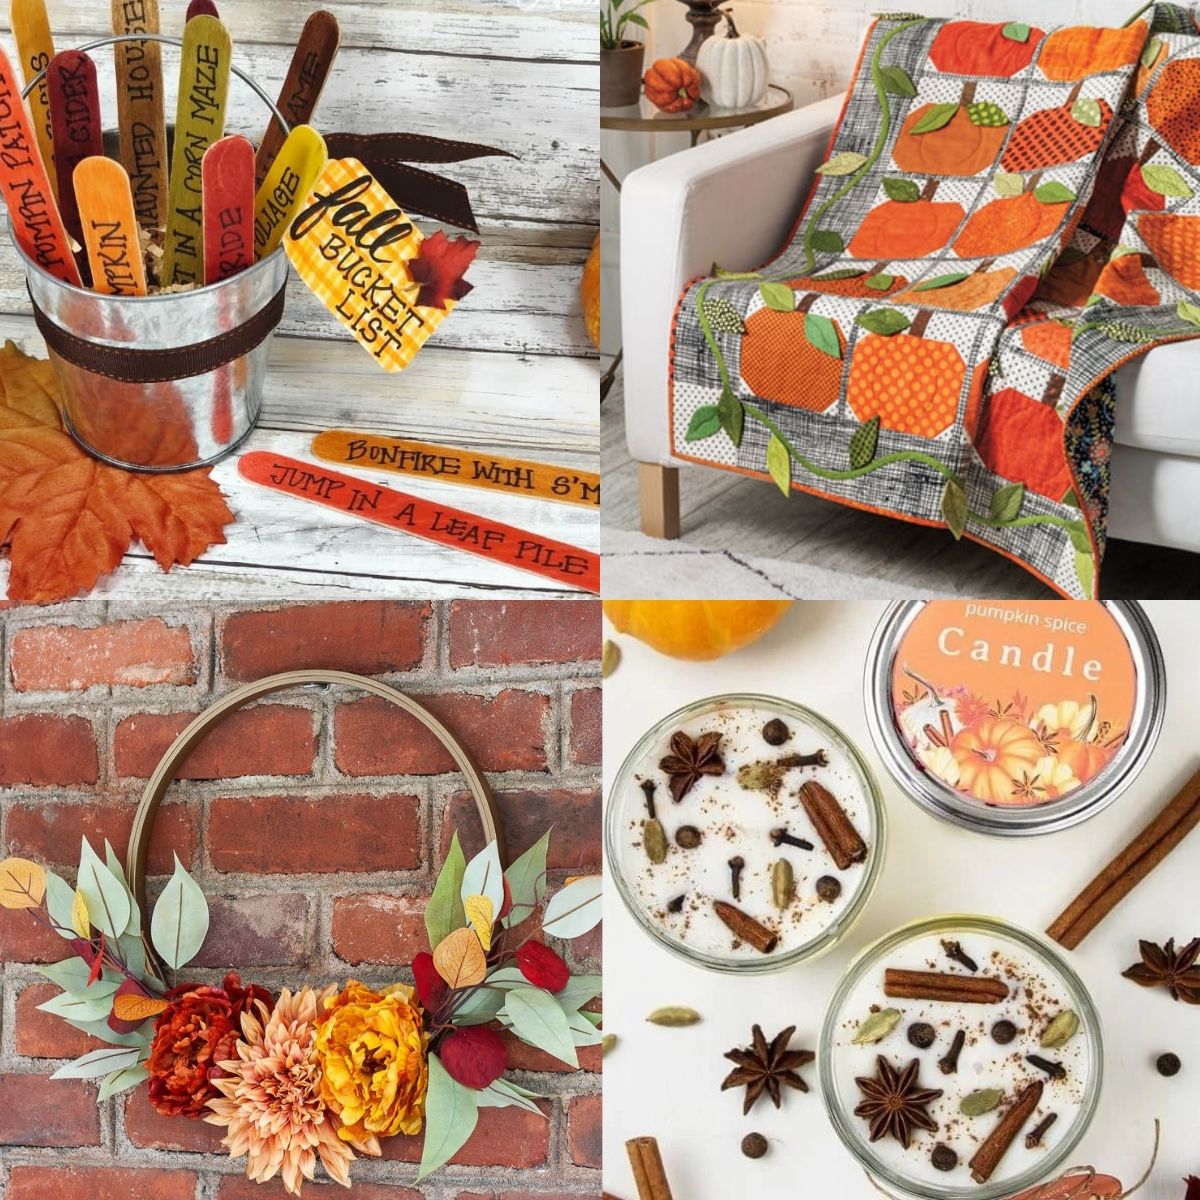 15 Easy Fall Crafts for Adults - DIY Fall Craft Ideas